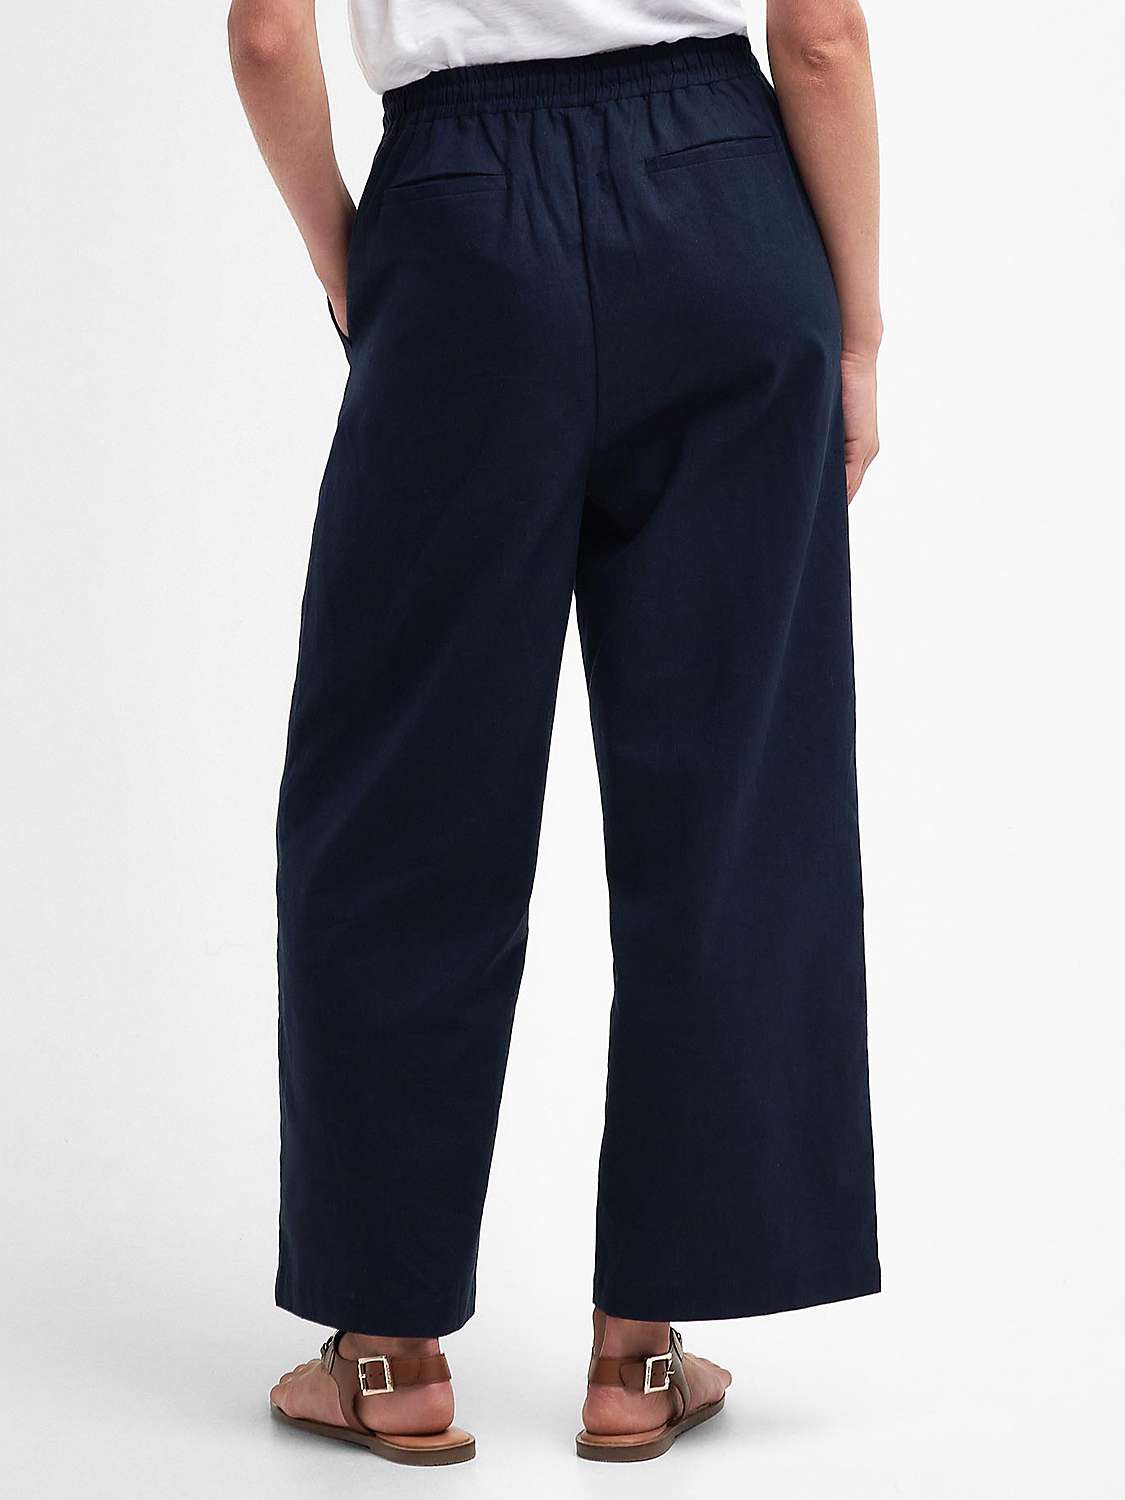 Buy Barbour Christie Trousers, Navy Online at johnlewis.com